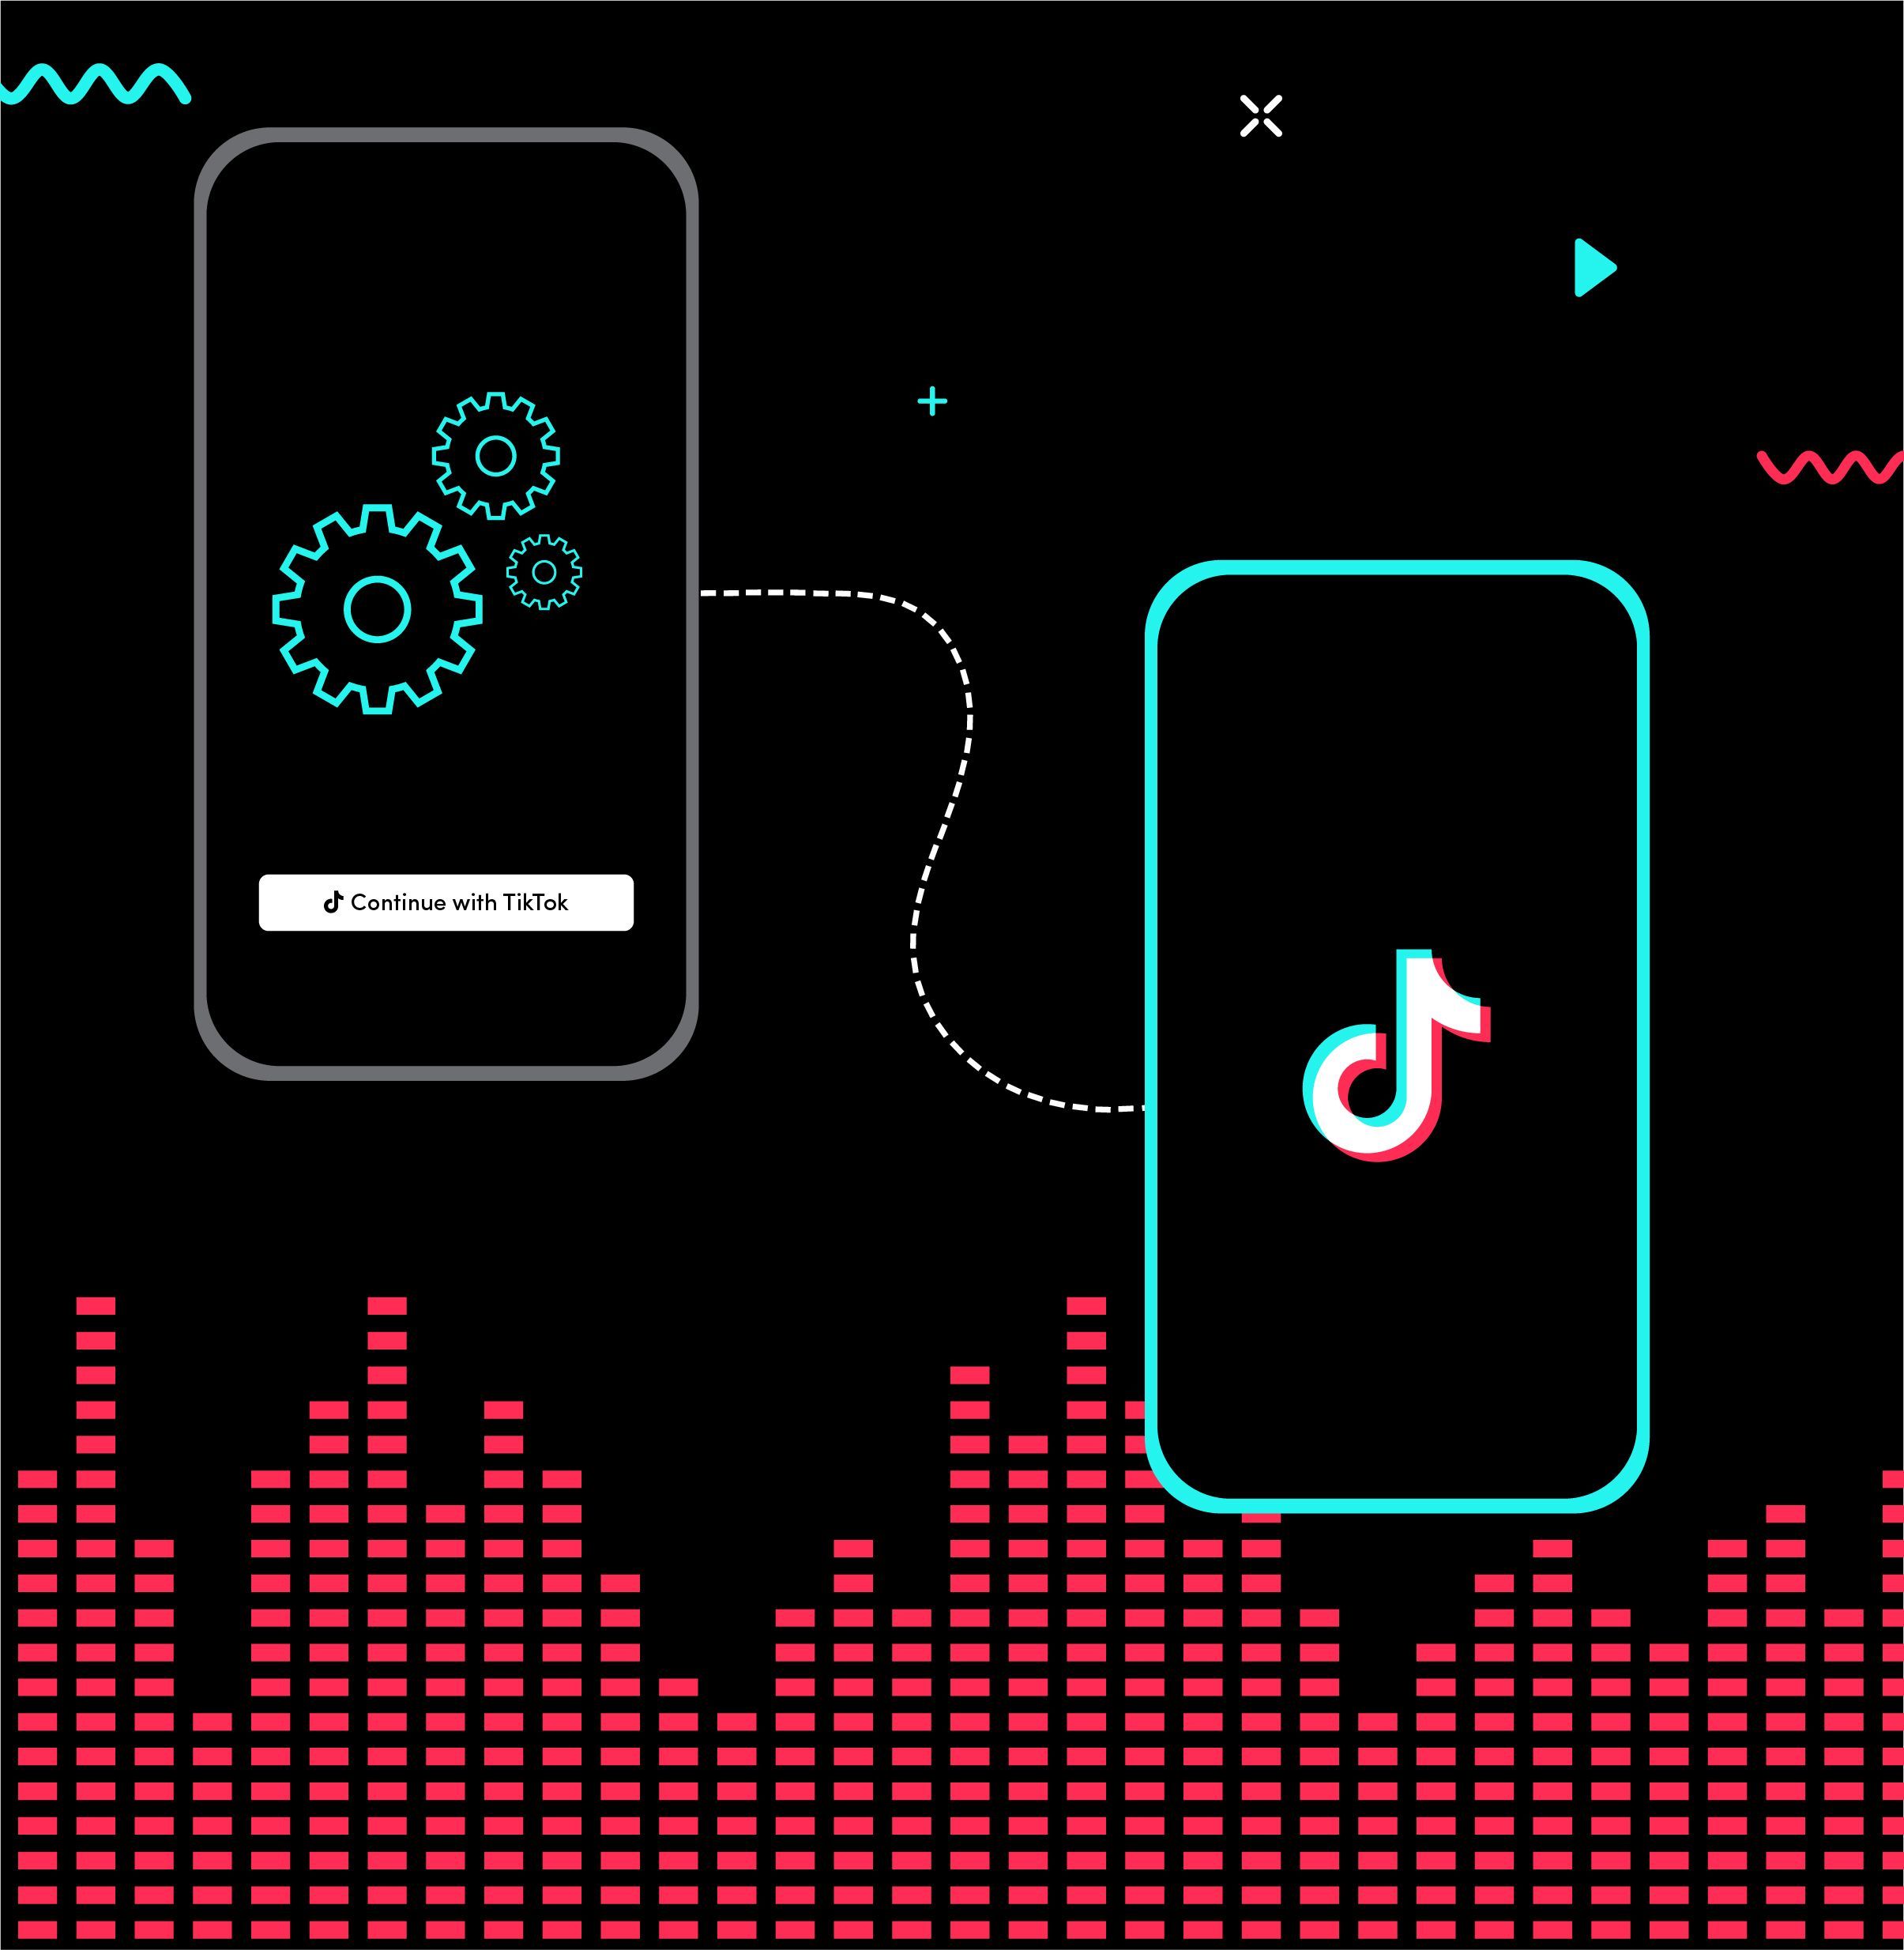 Share sounds and log in with TikTok through all-new developer kits ...